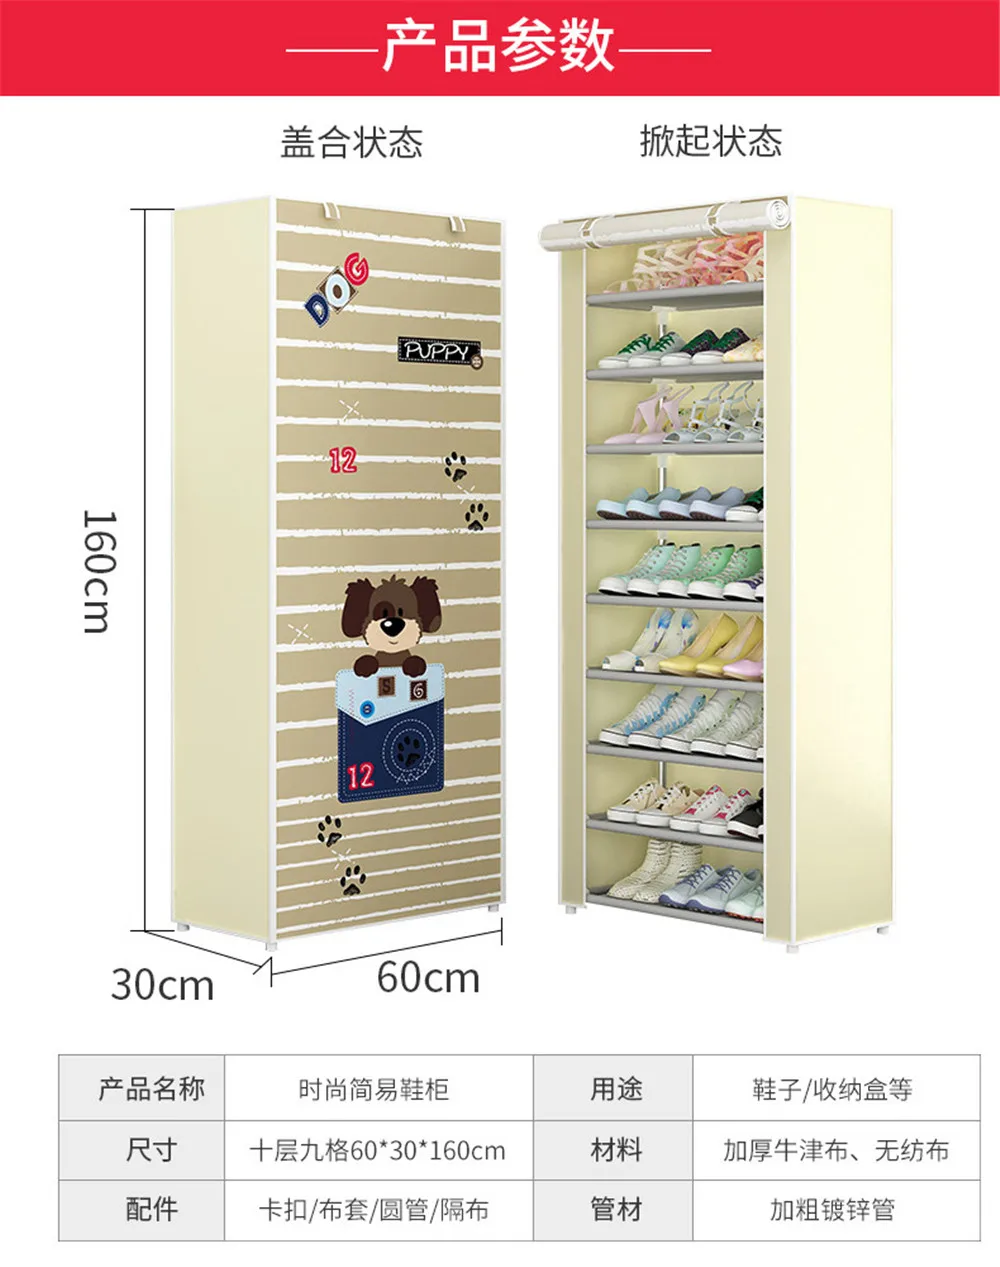 New Multi-Layer Shoe Shelf Simple Door Dust-Proof Storage Household Economical Removable Dormitory Shoe European Style Cloth